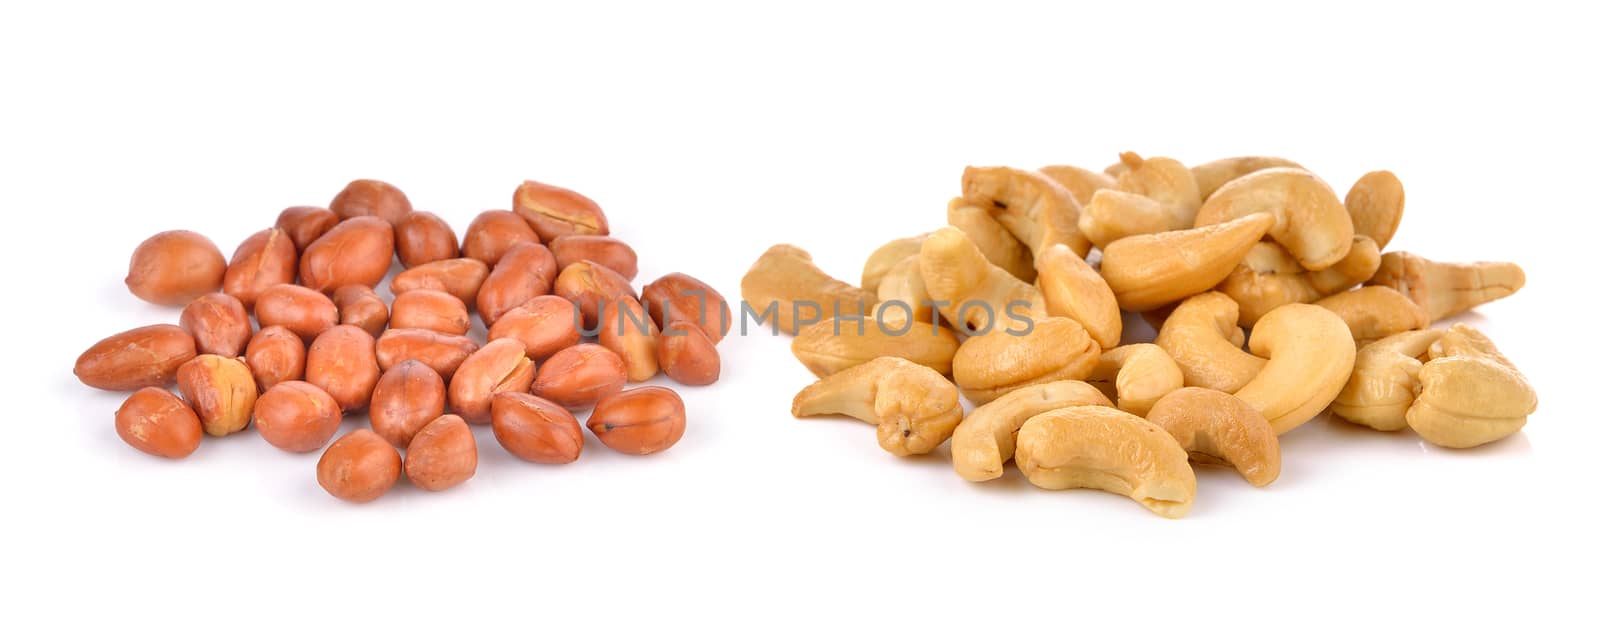 Cashews and peanats on white background 